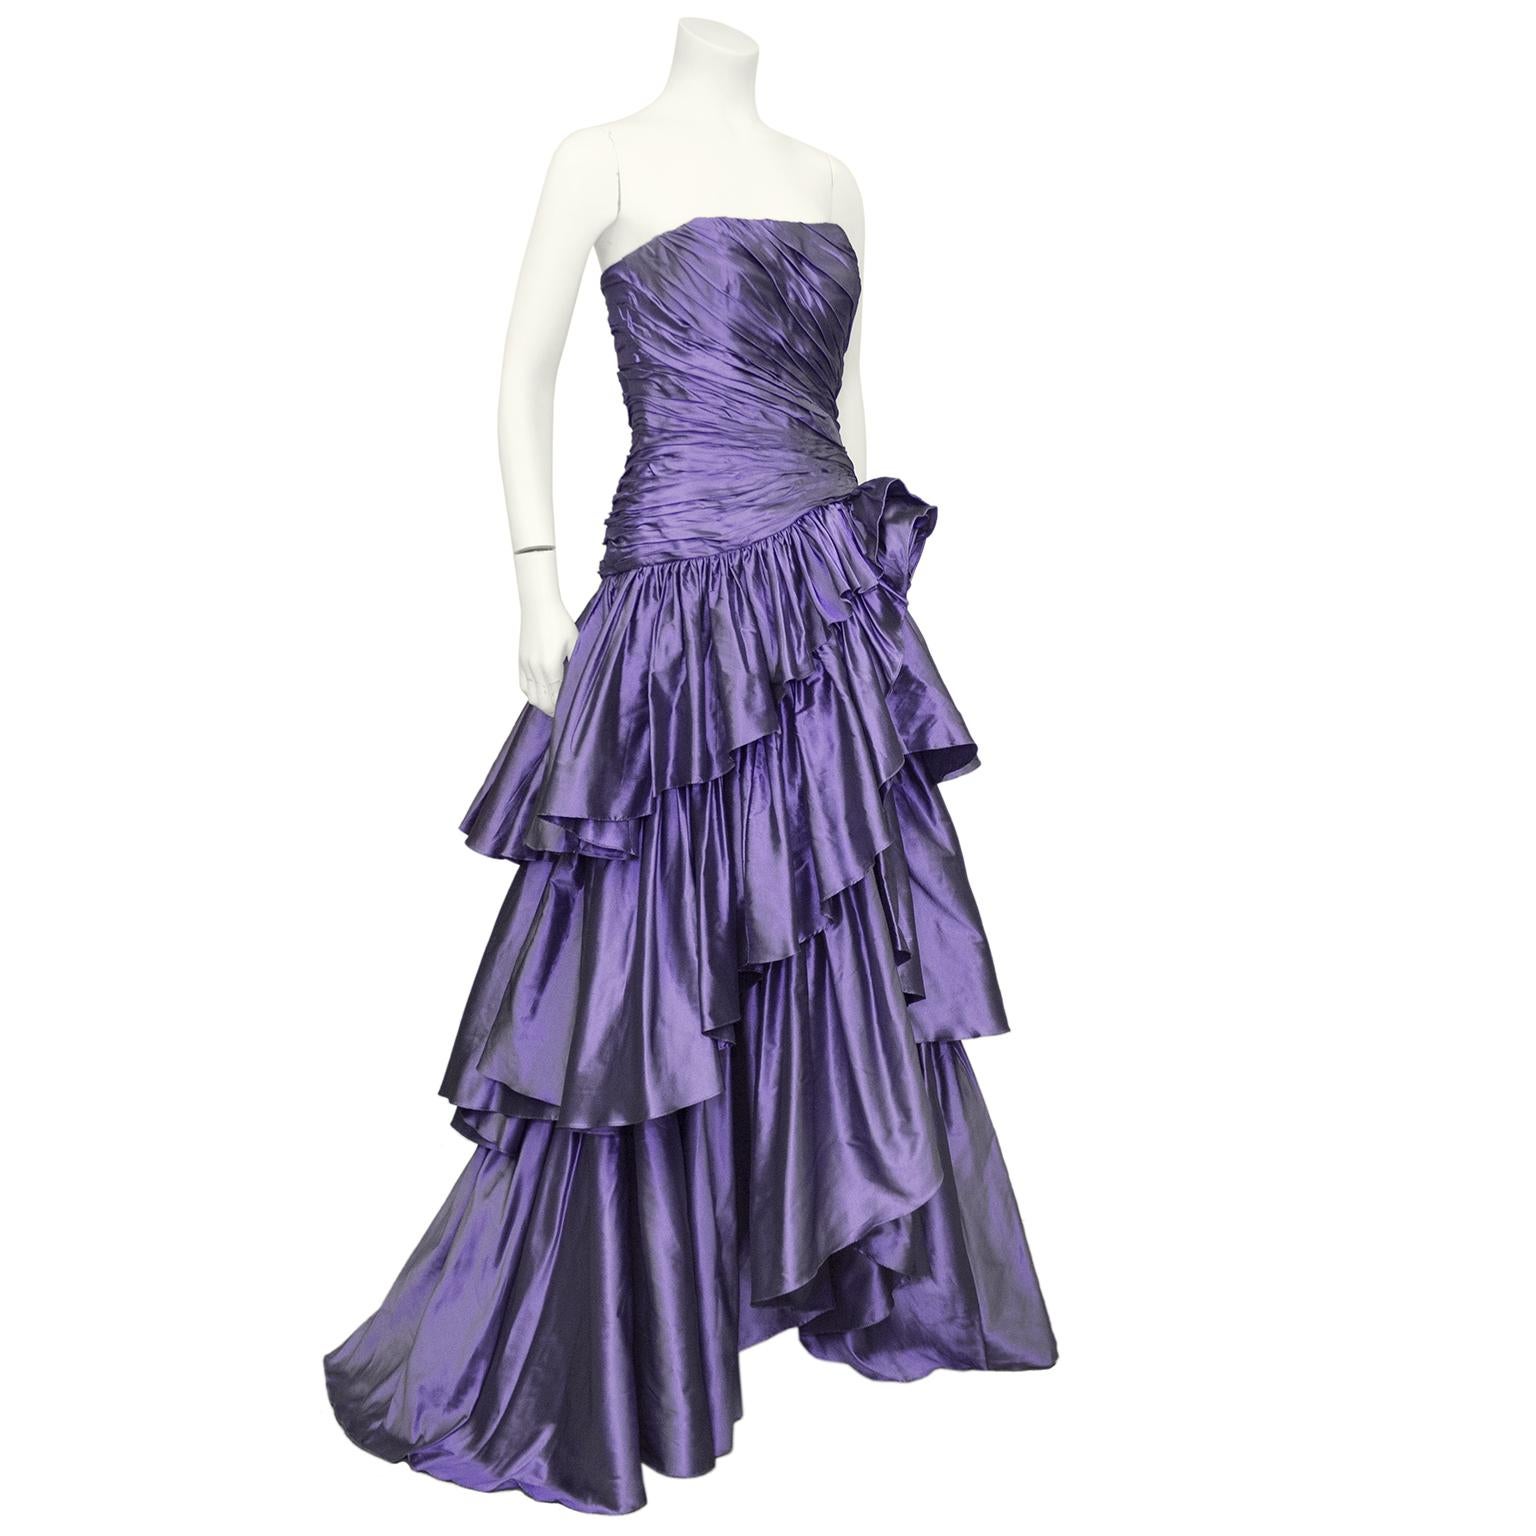 Over the top 1980s glam Bruce Oldfield Haute Couture purple silk taffeta gown. Strapless with ruched drop waist fitted bodice. Skirt features a large rosette that cascades into three tiered layers of perfectly draped purple taffeta. Excellent